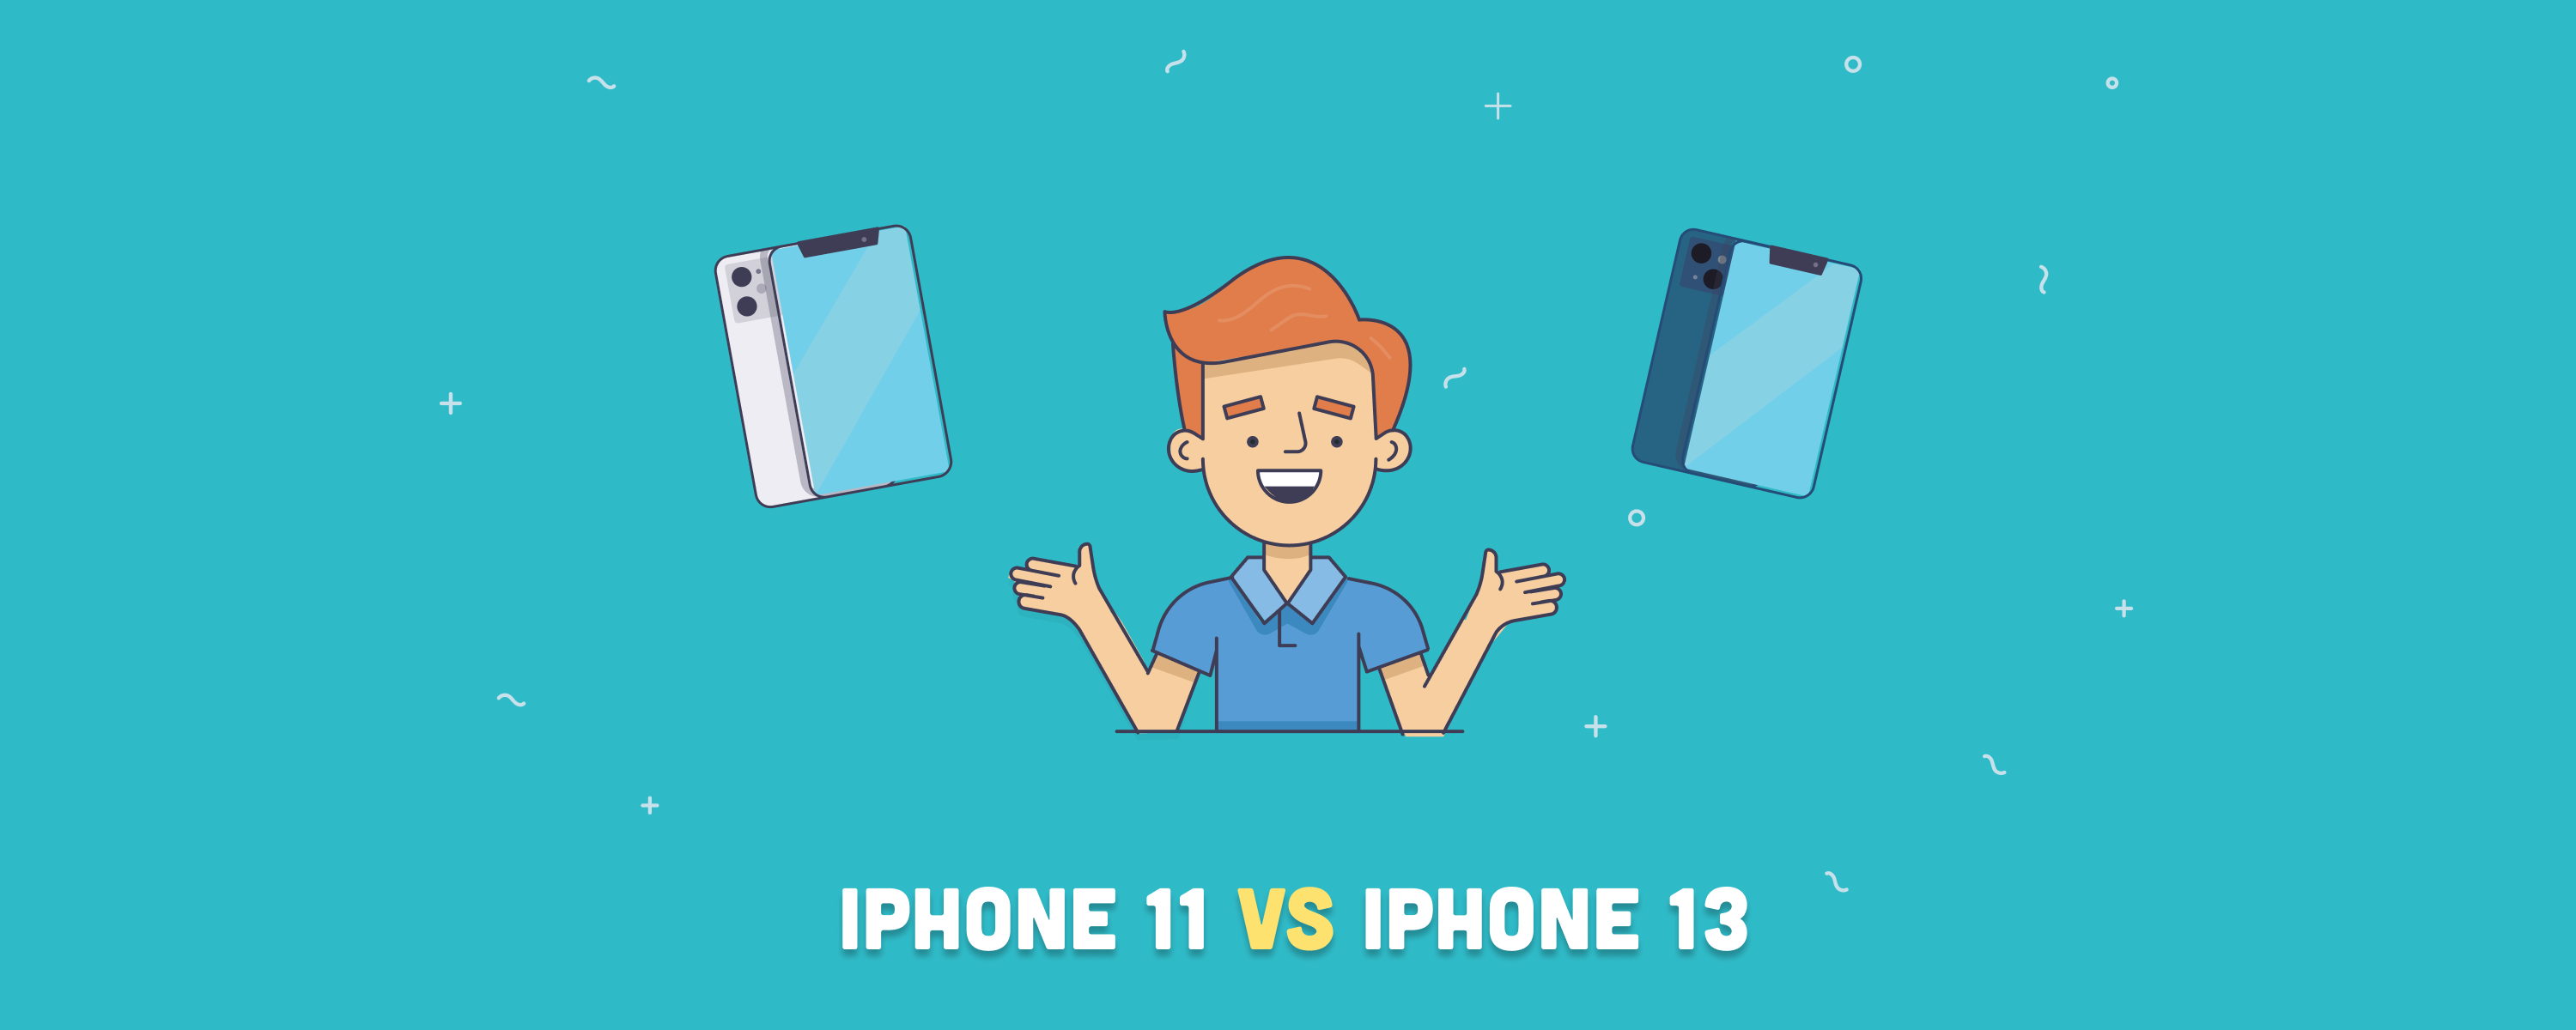 iPhone 11 vs. iPhone 13: What Are the Differences?